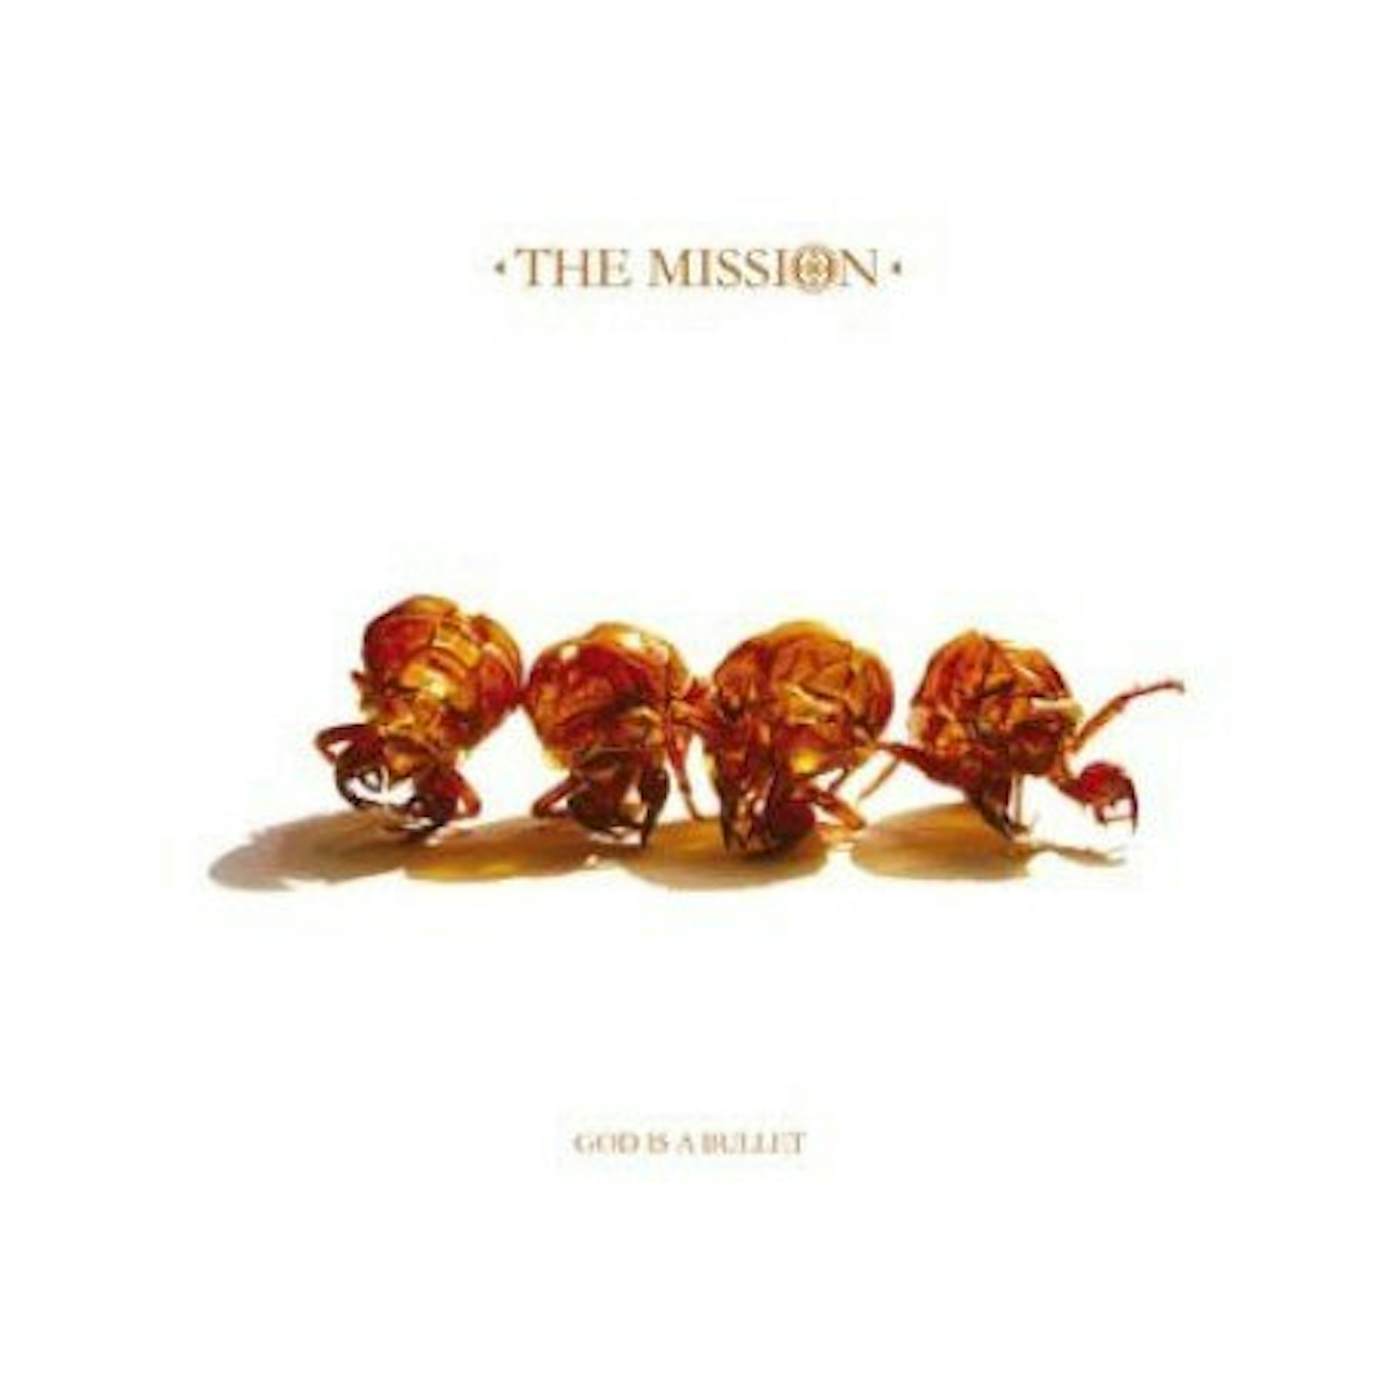 The Mission GOD IS A BULLET Vinyl Record - Limited Edition